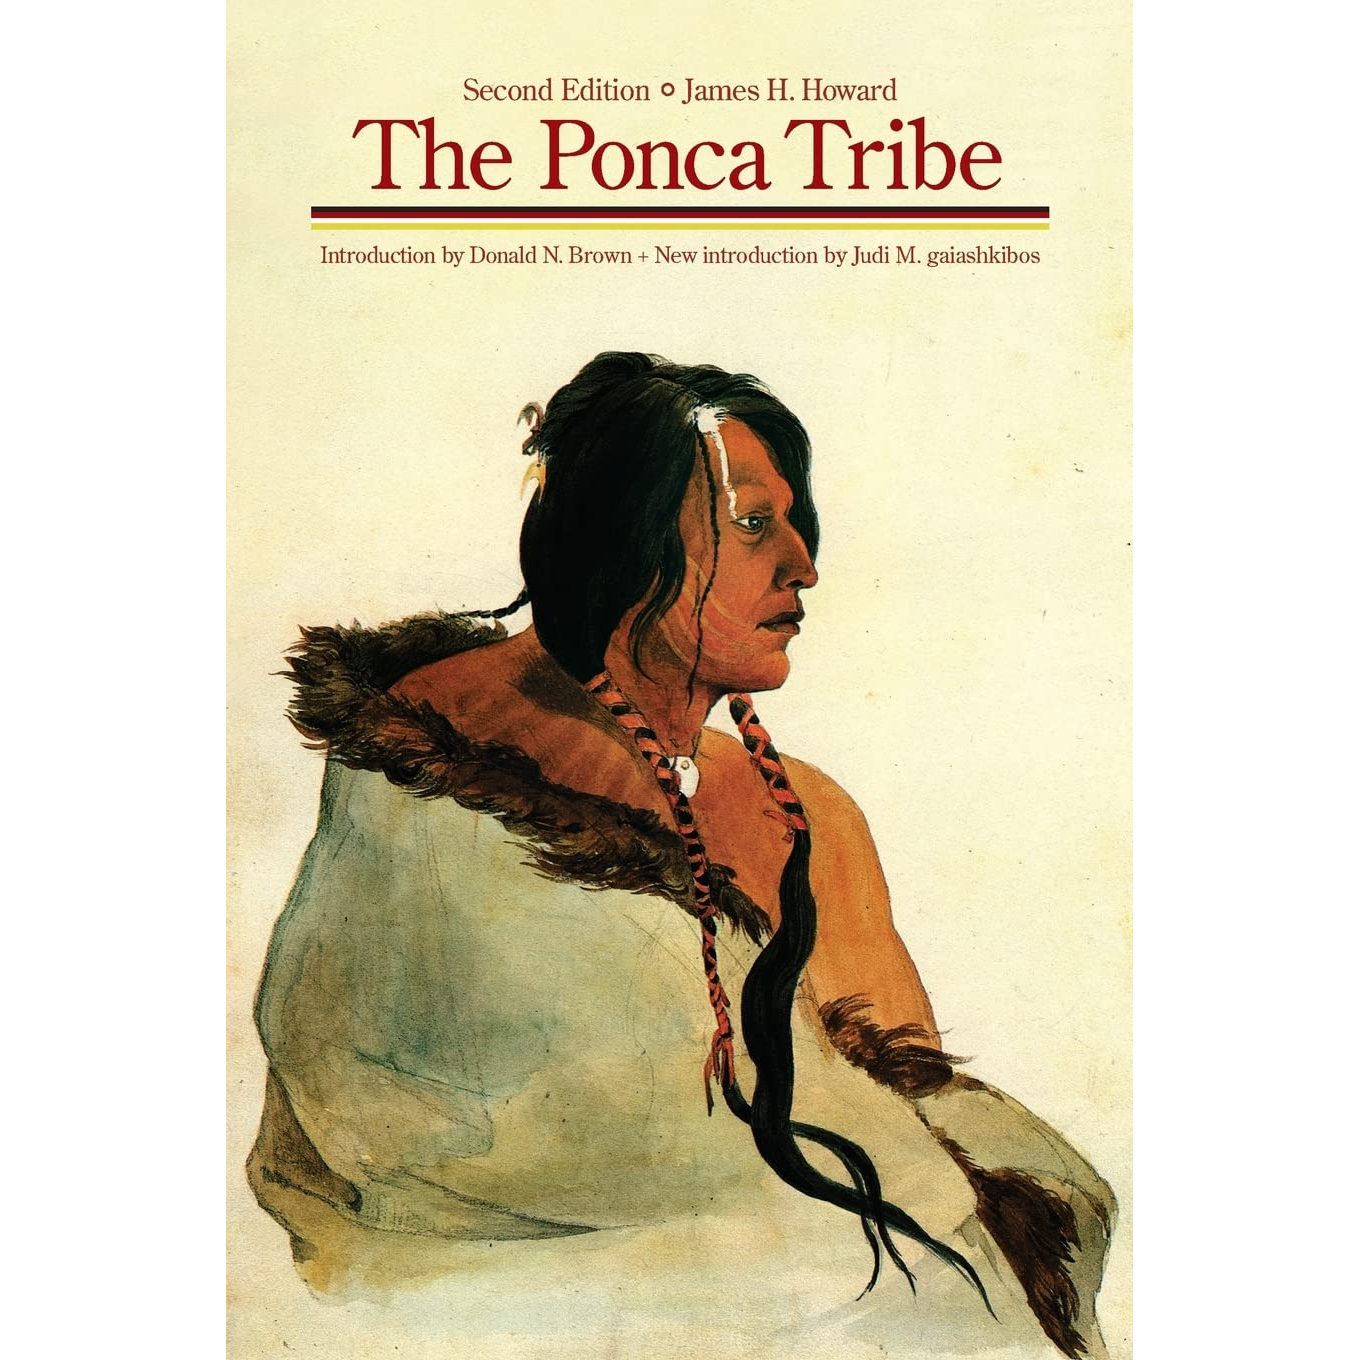 The Ponca Tribe by James H. Howard